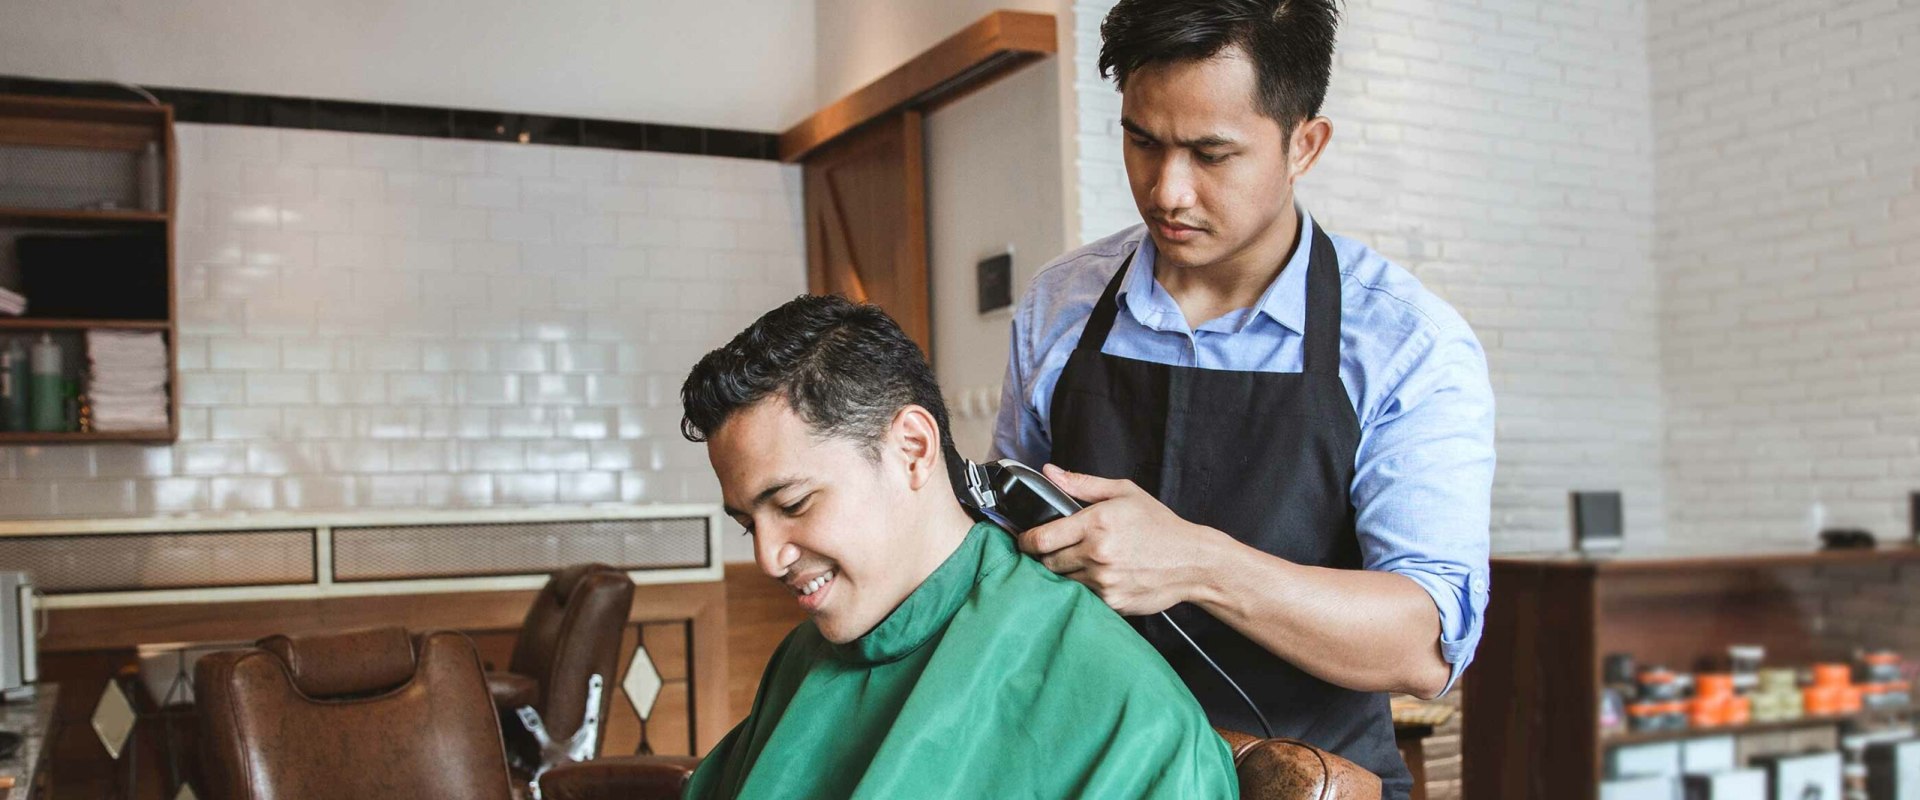 How Much Does a Haircut Cost at a Barber Shop in Washington DC?